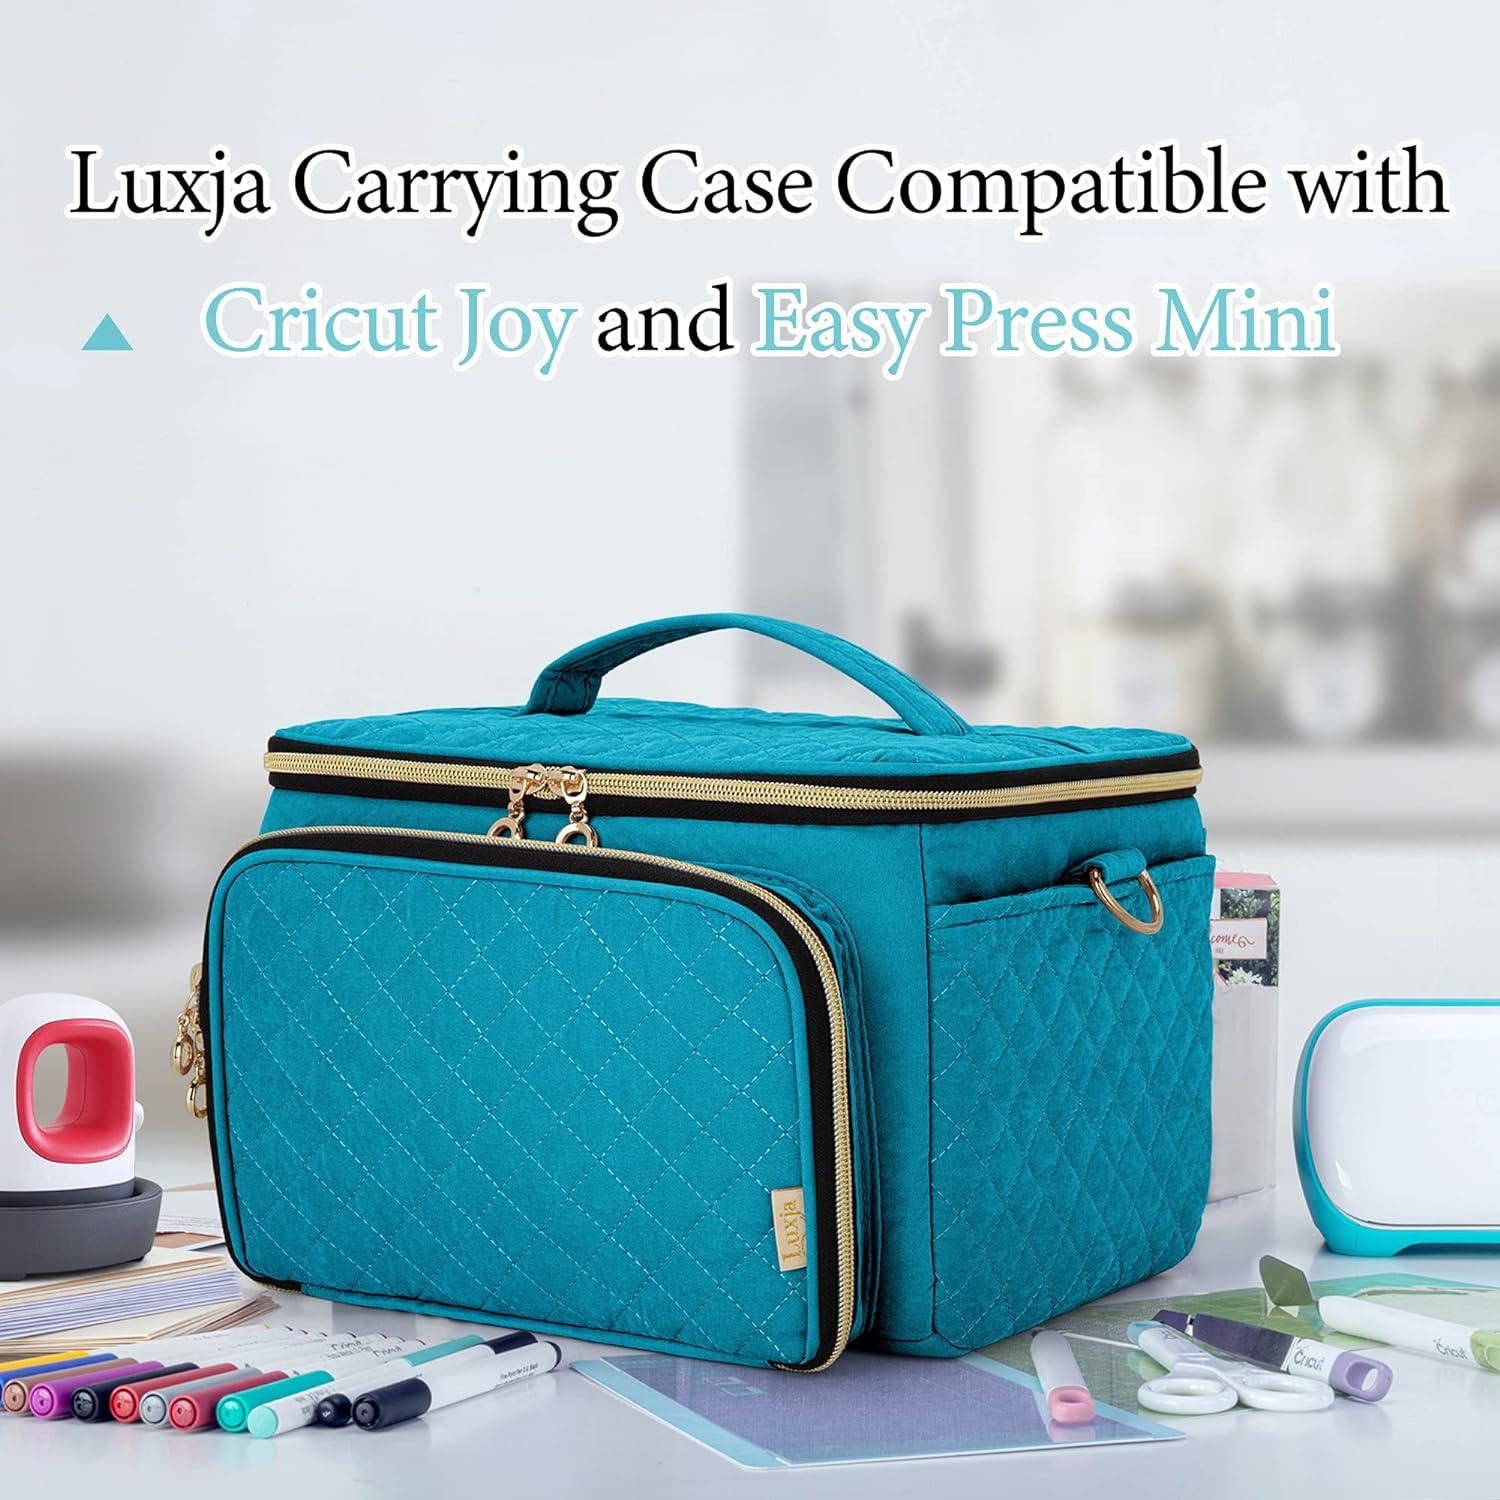 LUXJA Carrying Case Compatible with Cricut Joy and Easy Press Mini,  Carrying Bag with Supplies Storage Sections, Polka Dots